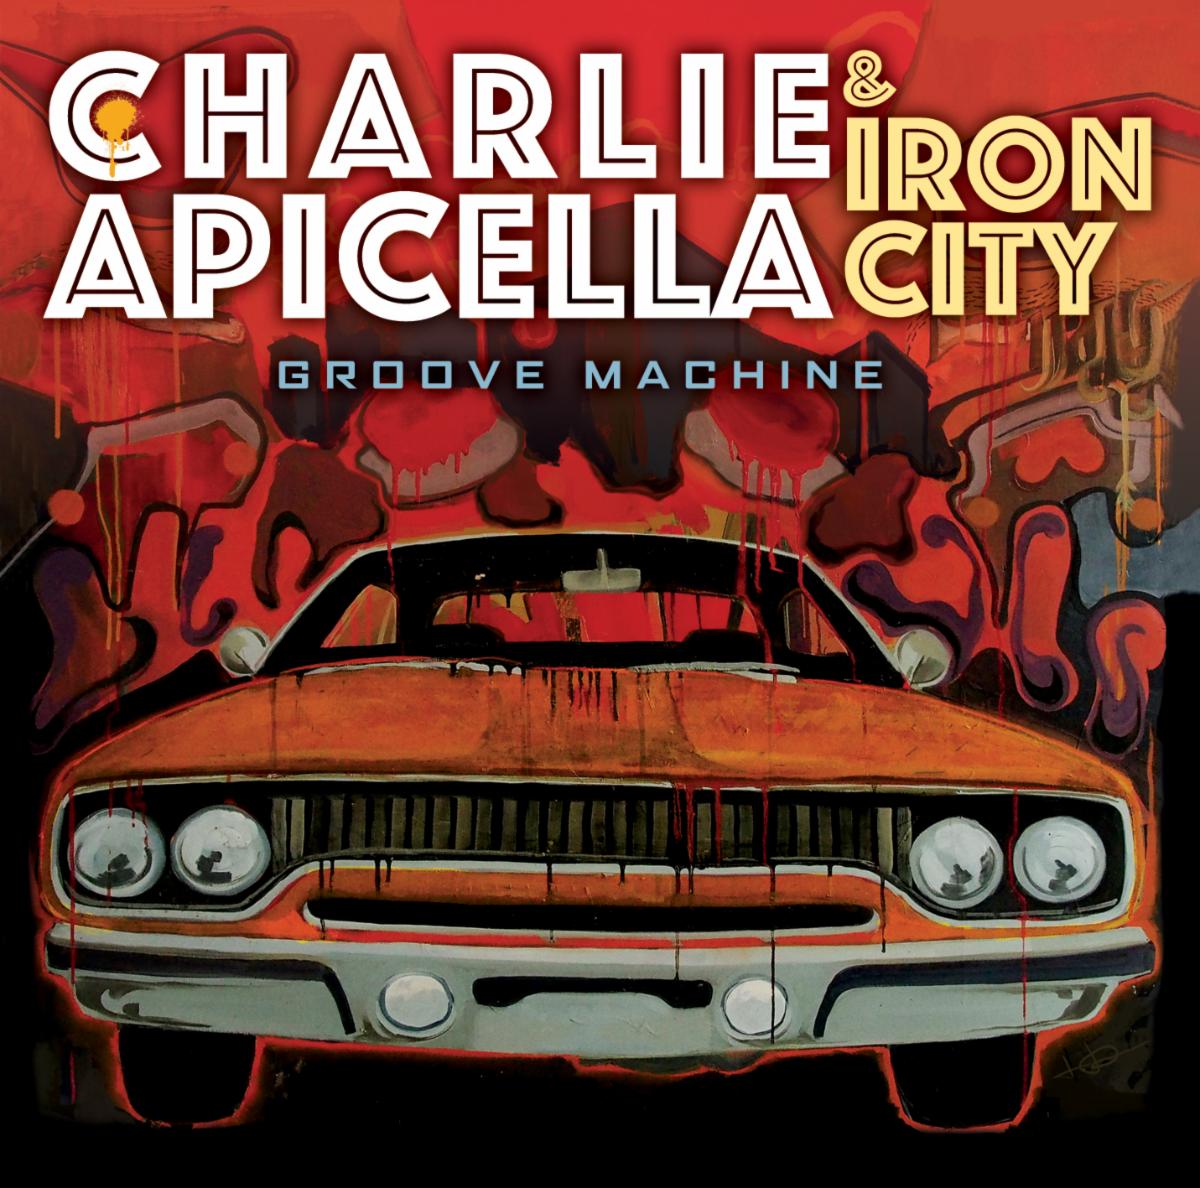 Charlie Apicella and Iron City